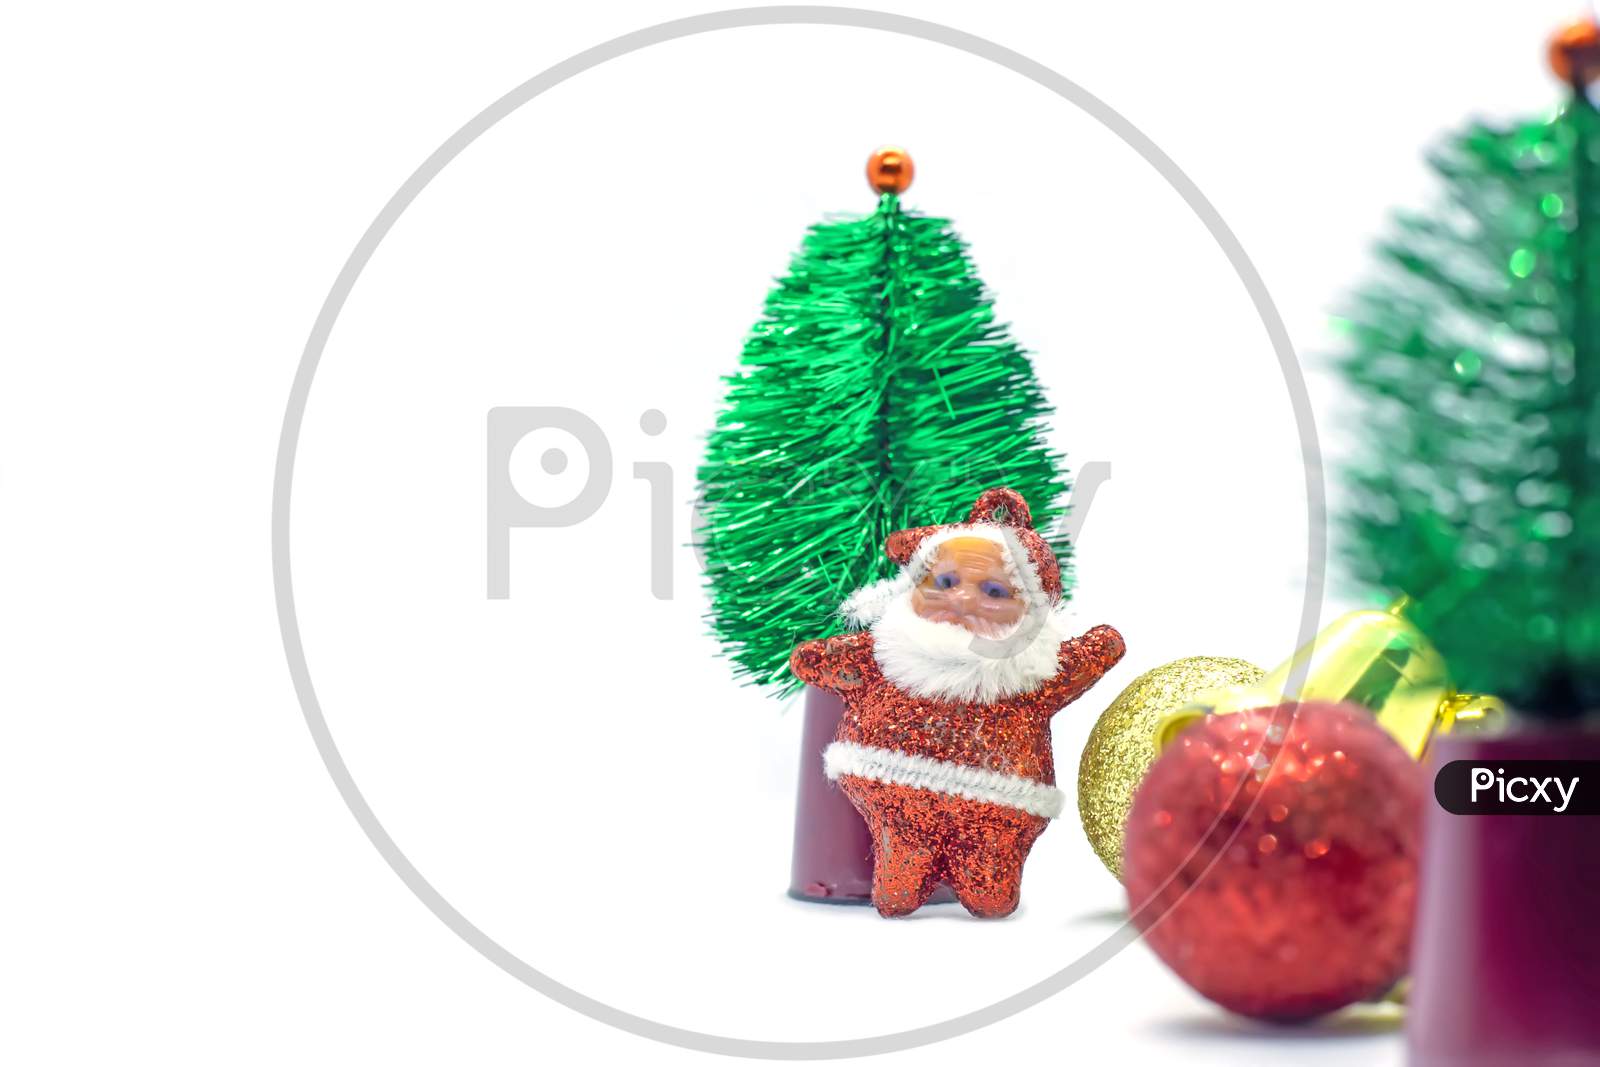 Christmas Card With Santa Claus, Tree On White Background, Gold And Red Balls